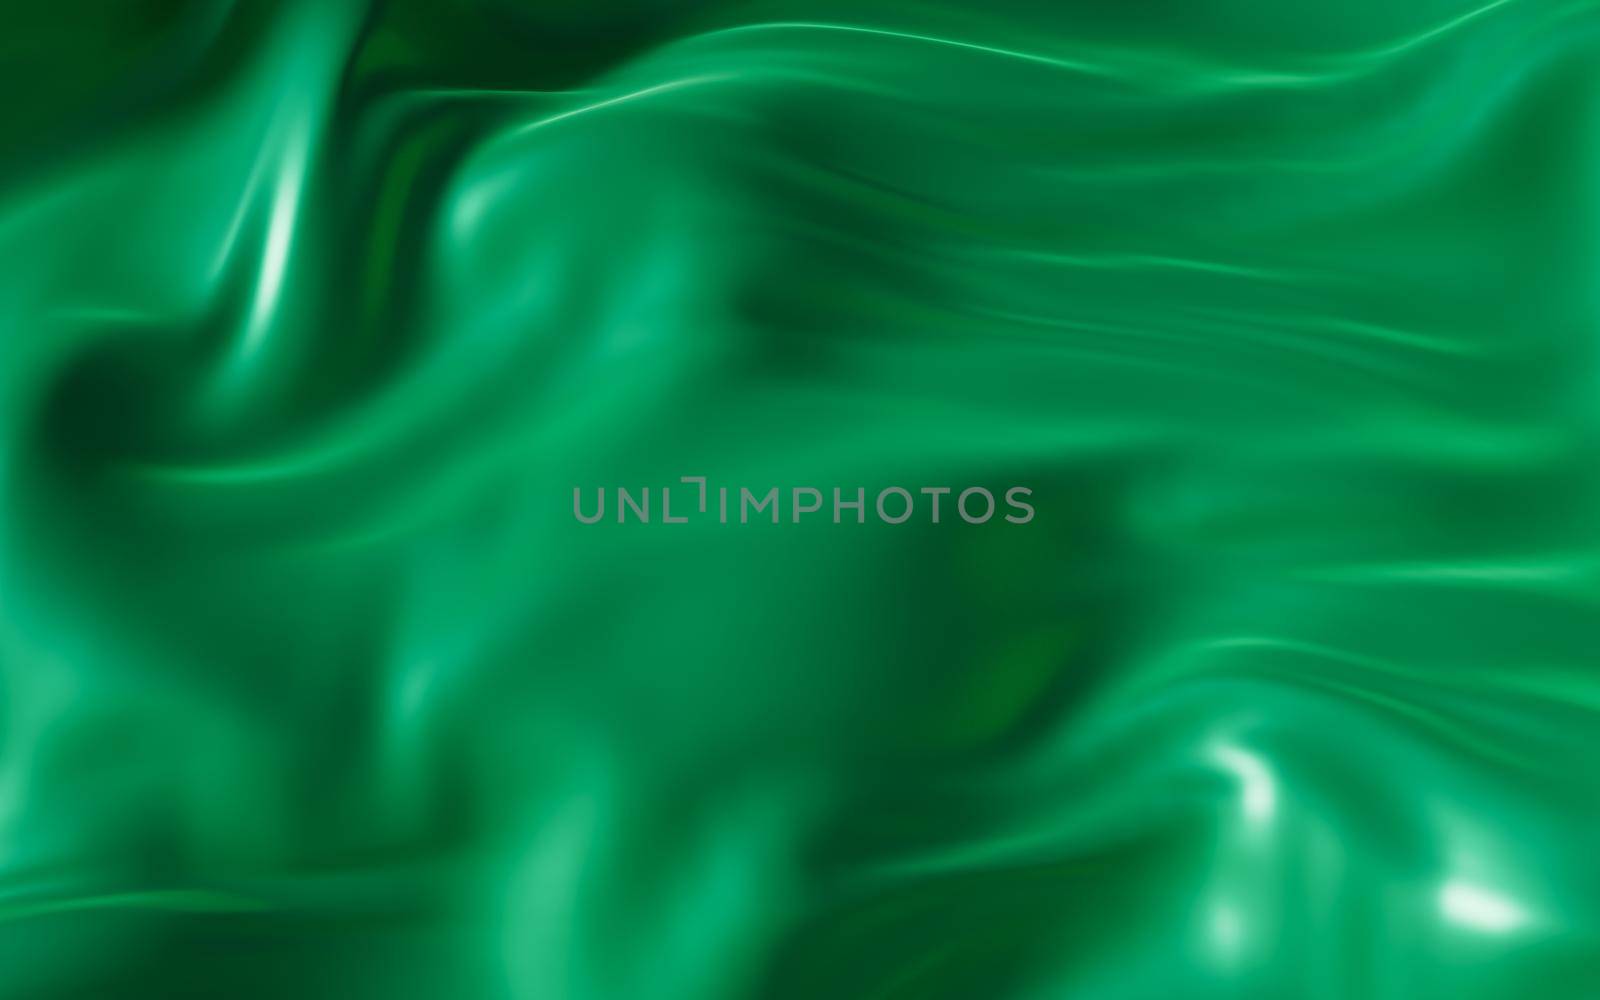 Flowing green cloth background, 3d rendering. Computer digital drawing.